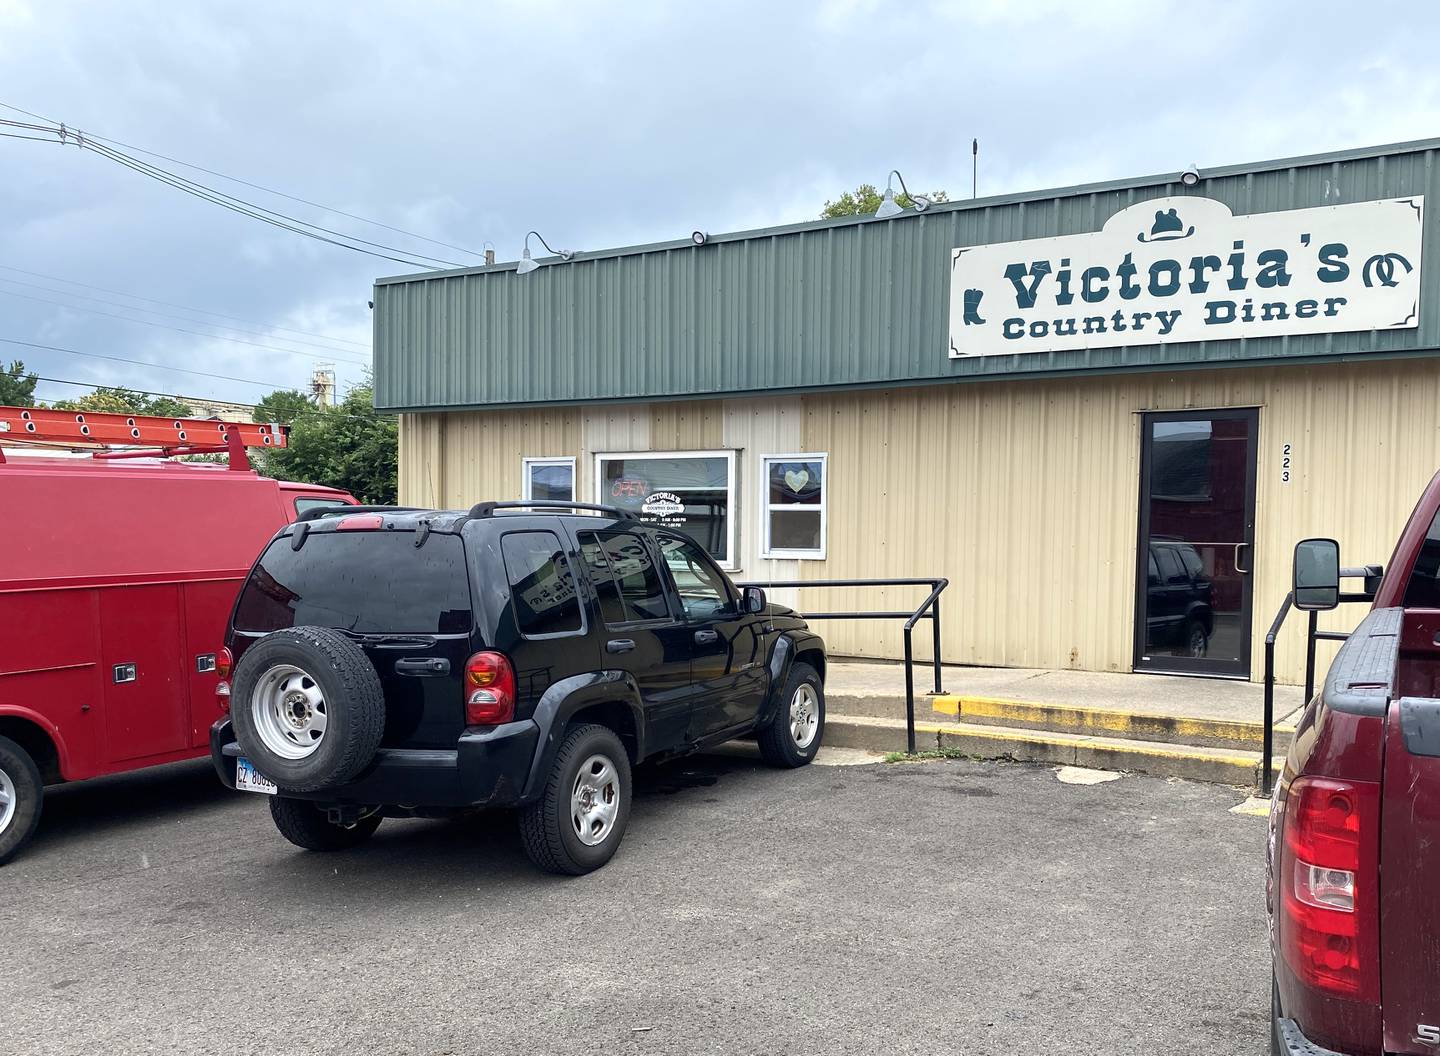 Victoria's Country Diner is located in downtown Lacon, Ill.